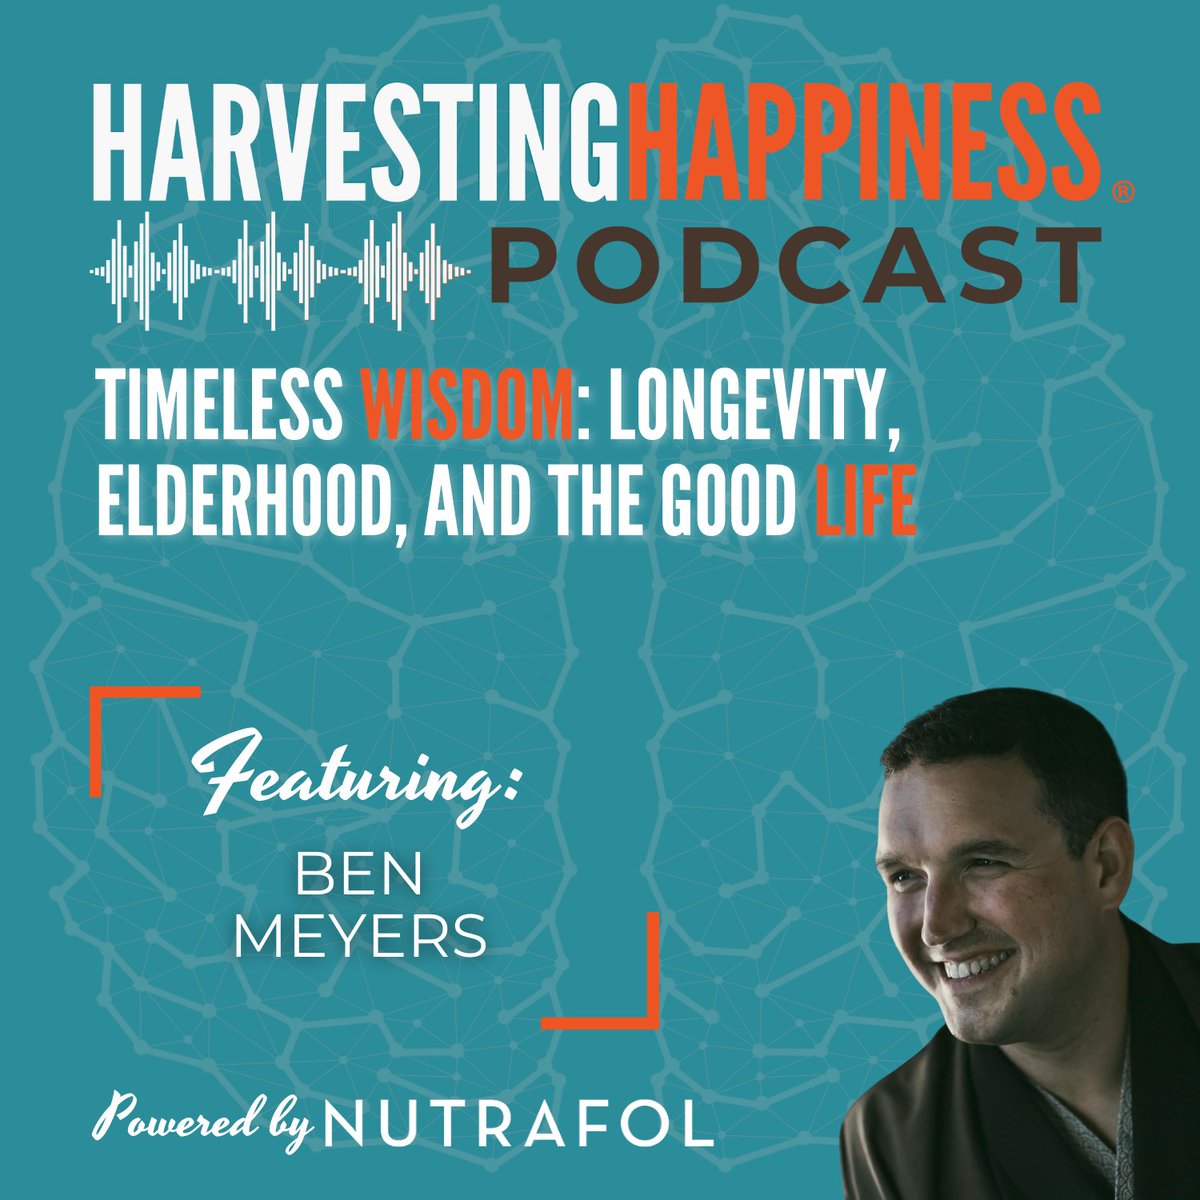 Uncover the impact of #positivity on longevity and #wellbeing with Ben Meyers, Founder of @LongeviQuest, on the Harvesting Happiness Podcast. Lisa Cypers Kamen leads an inspiring discussion on the enduring wisdom of supercentenarians and the essence of a positive outlook. ⚡️…